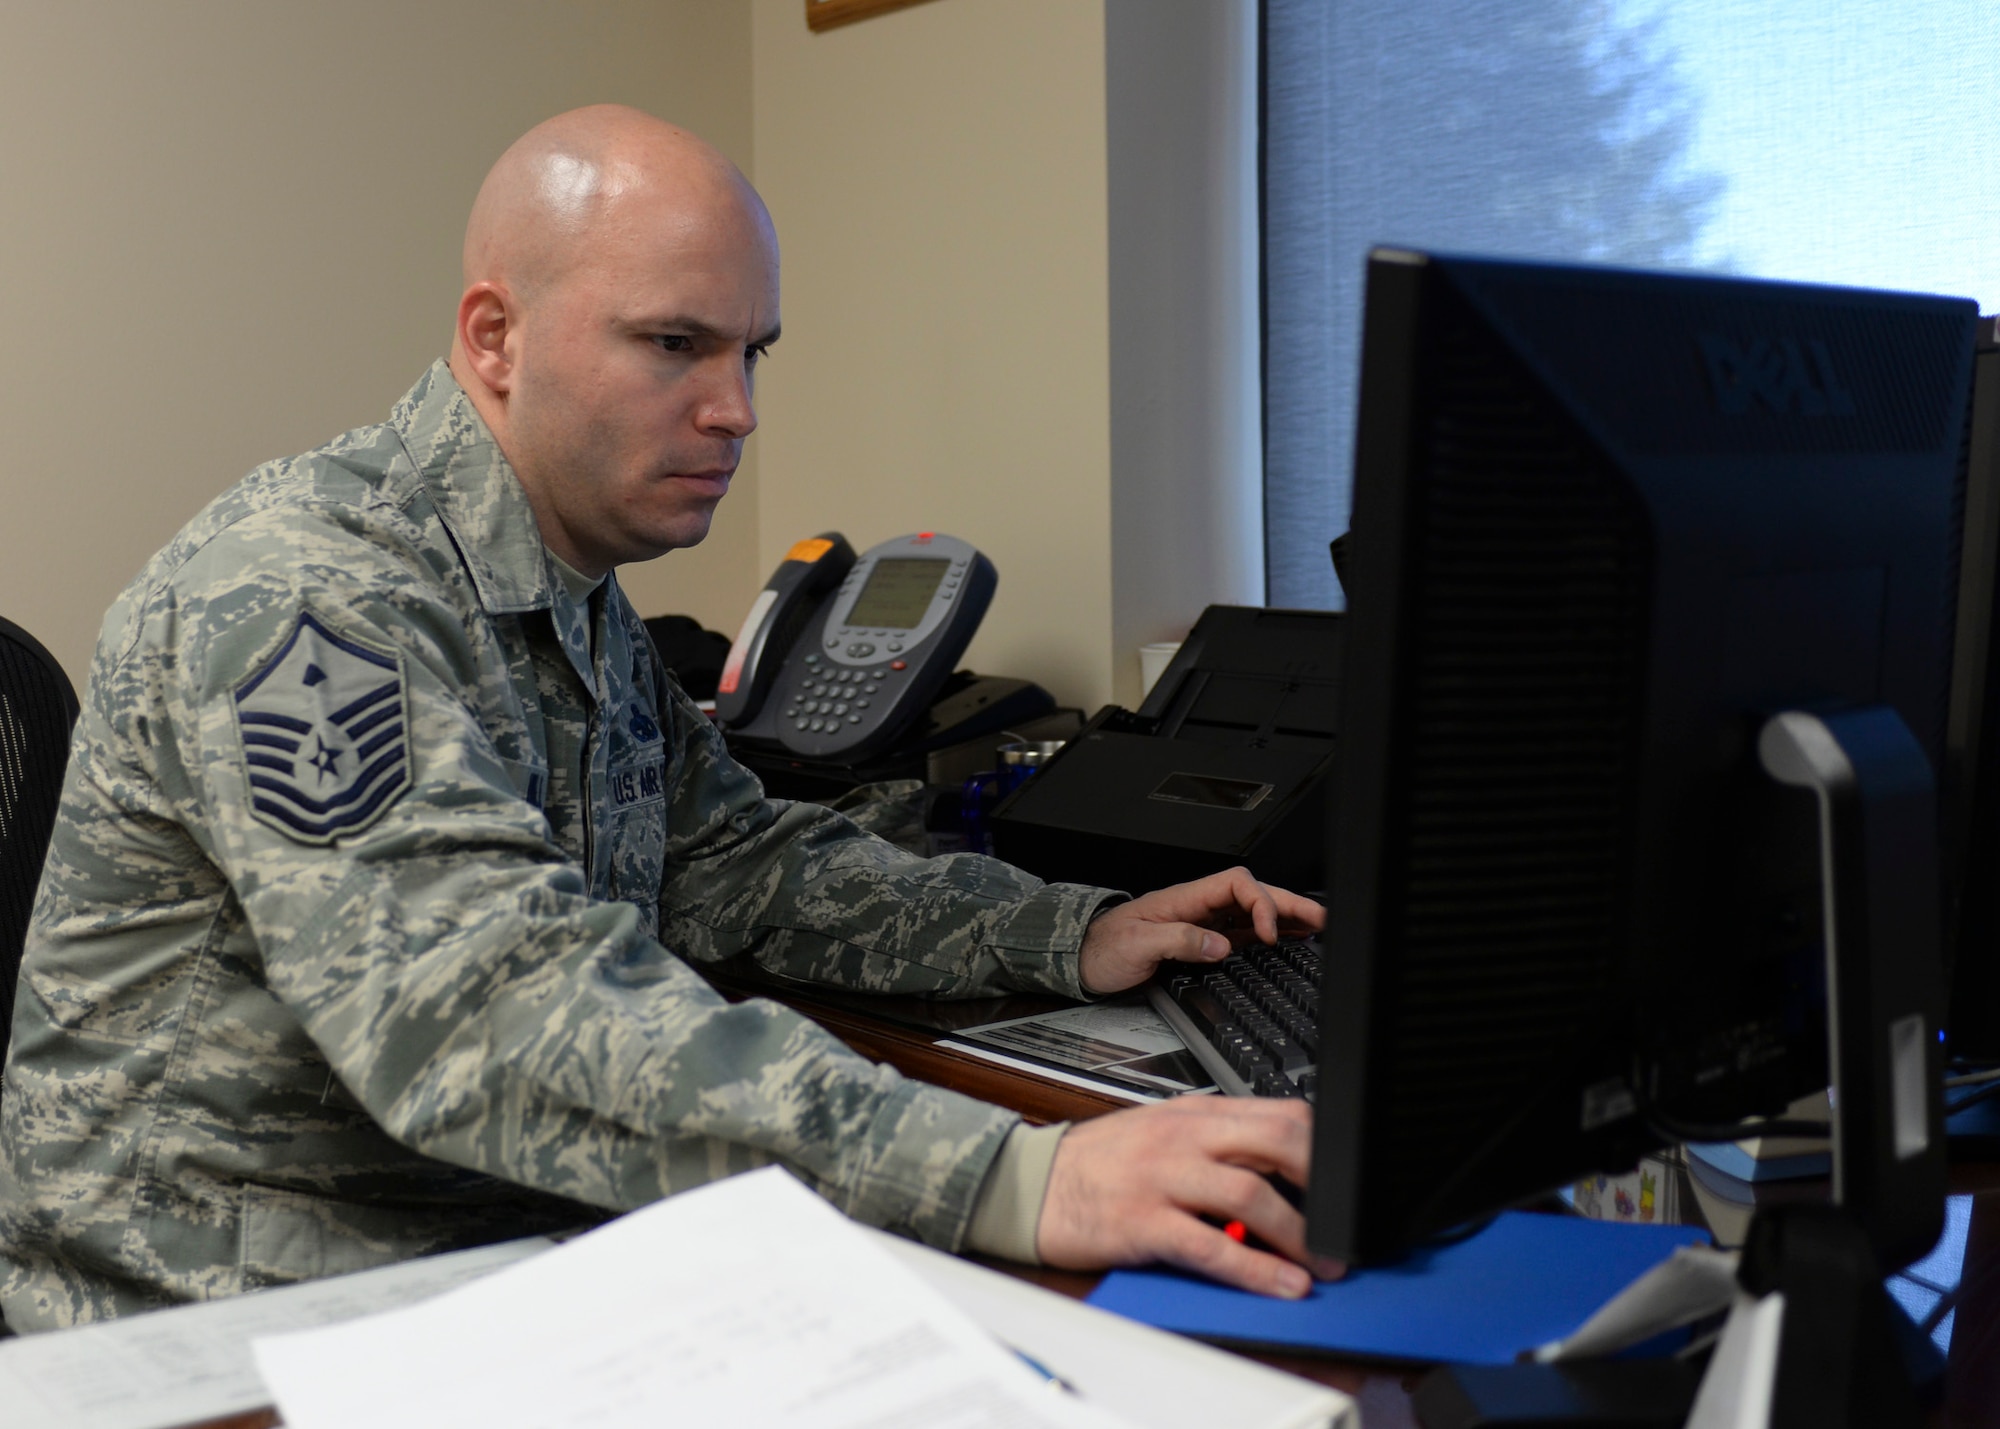 Master Sgt. Patrick Hill, 28th Medical Group first sergeant, updates paperwork and responds to base personnel inquiries at his workstation at Ellsworth Air Force Base, S.D., Nov. 13, 2014. As a first sergeant, much of each day is dedicated to staying informed and properly responding to Airmen’s needs. (U.S. Air Force photo by Senior Airman Anania Tekurio/Released) 